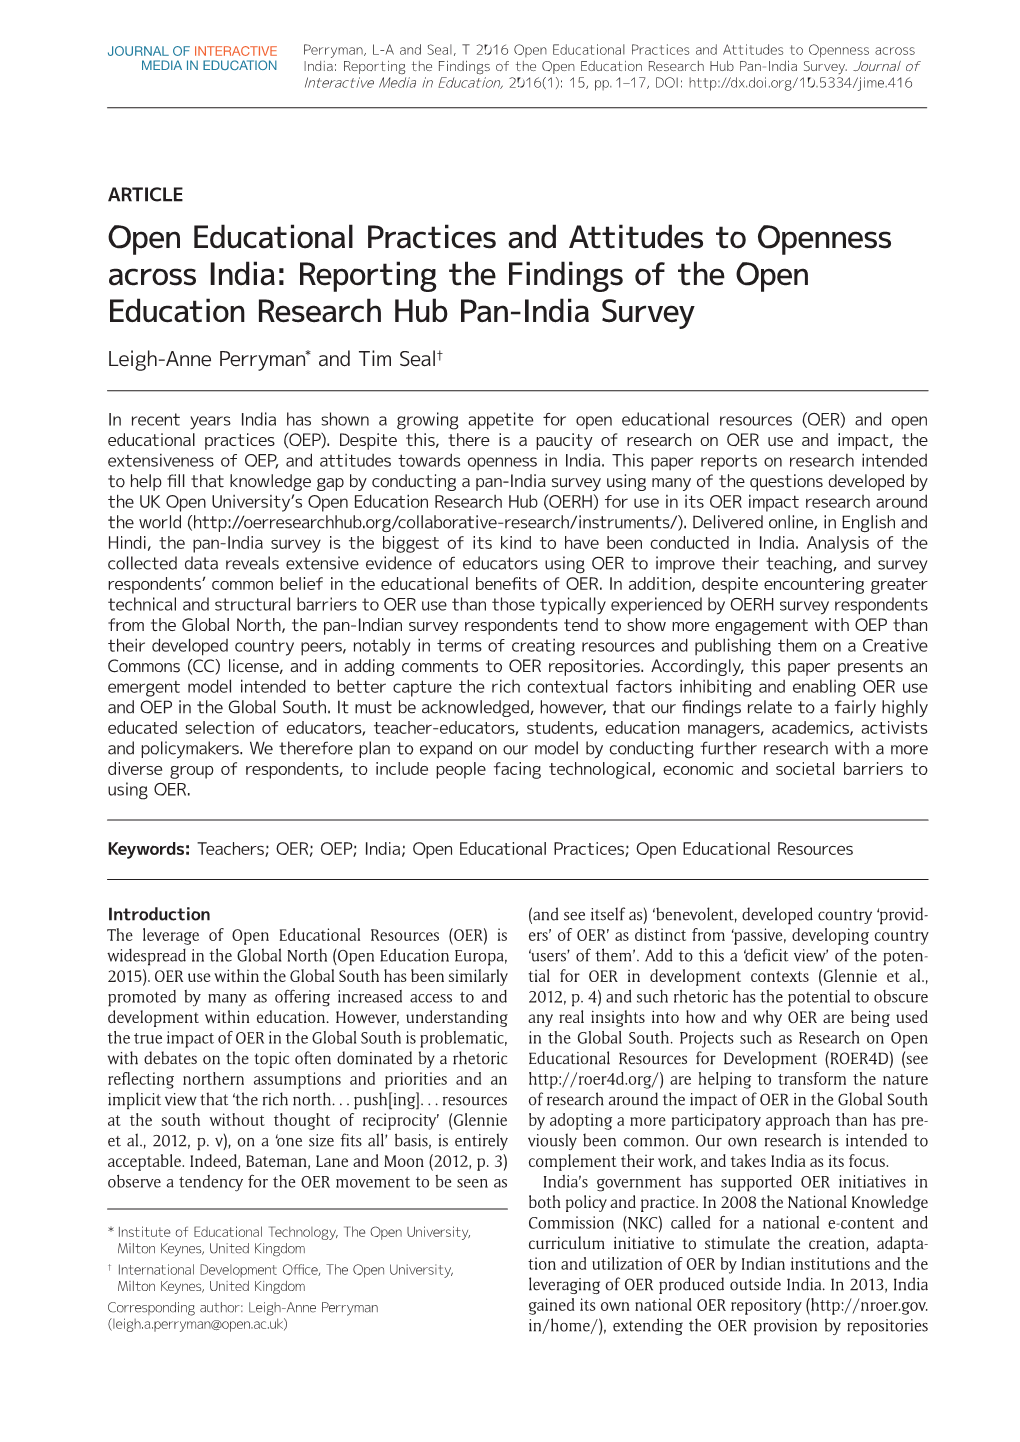 Open Educational Practices and Attitudes to Openness Across MEDIA in EDUCATION India: Reporting the Findings of the Open Education Research Hub Pan-India Survey